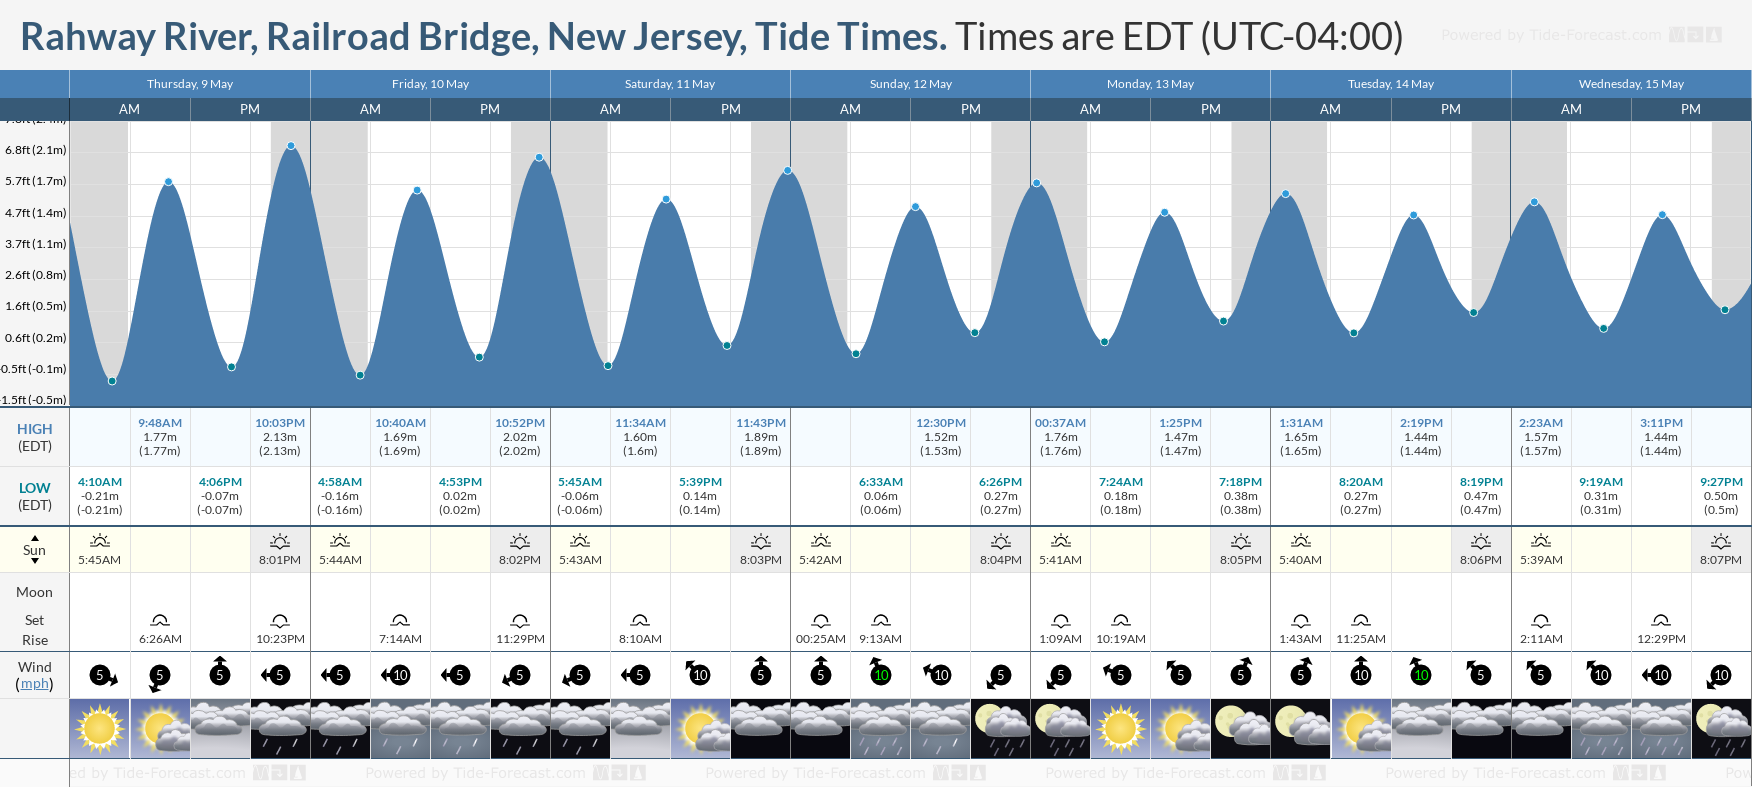 Rahway River, Railroad Bridge, New Jersey Tide Chart including high and low tide times for the next 7 days